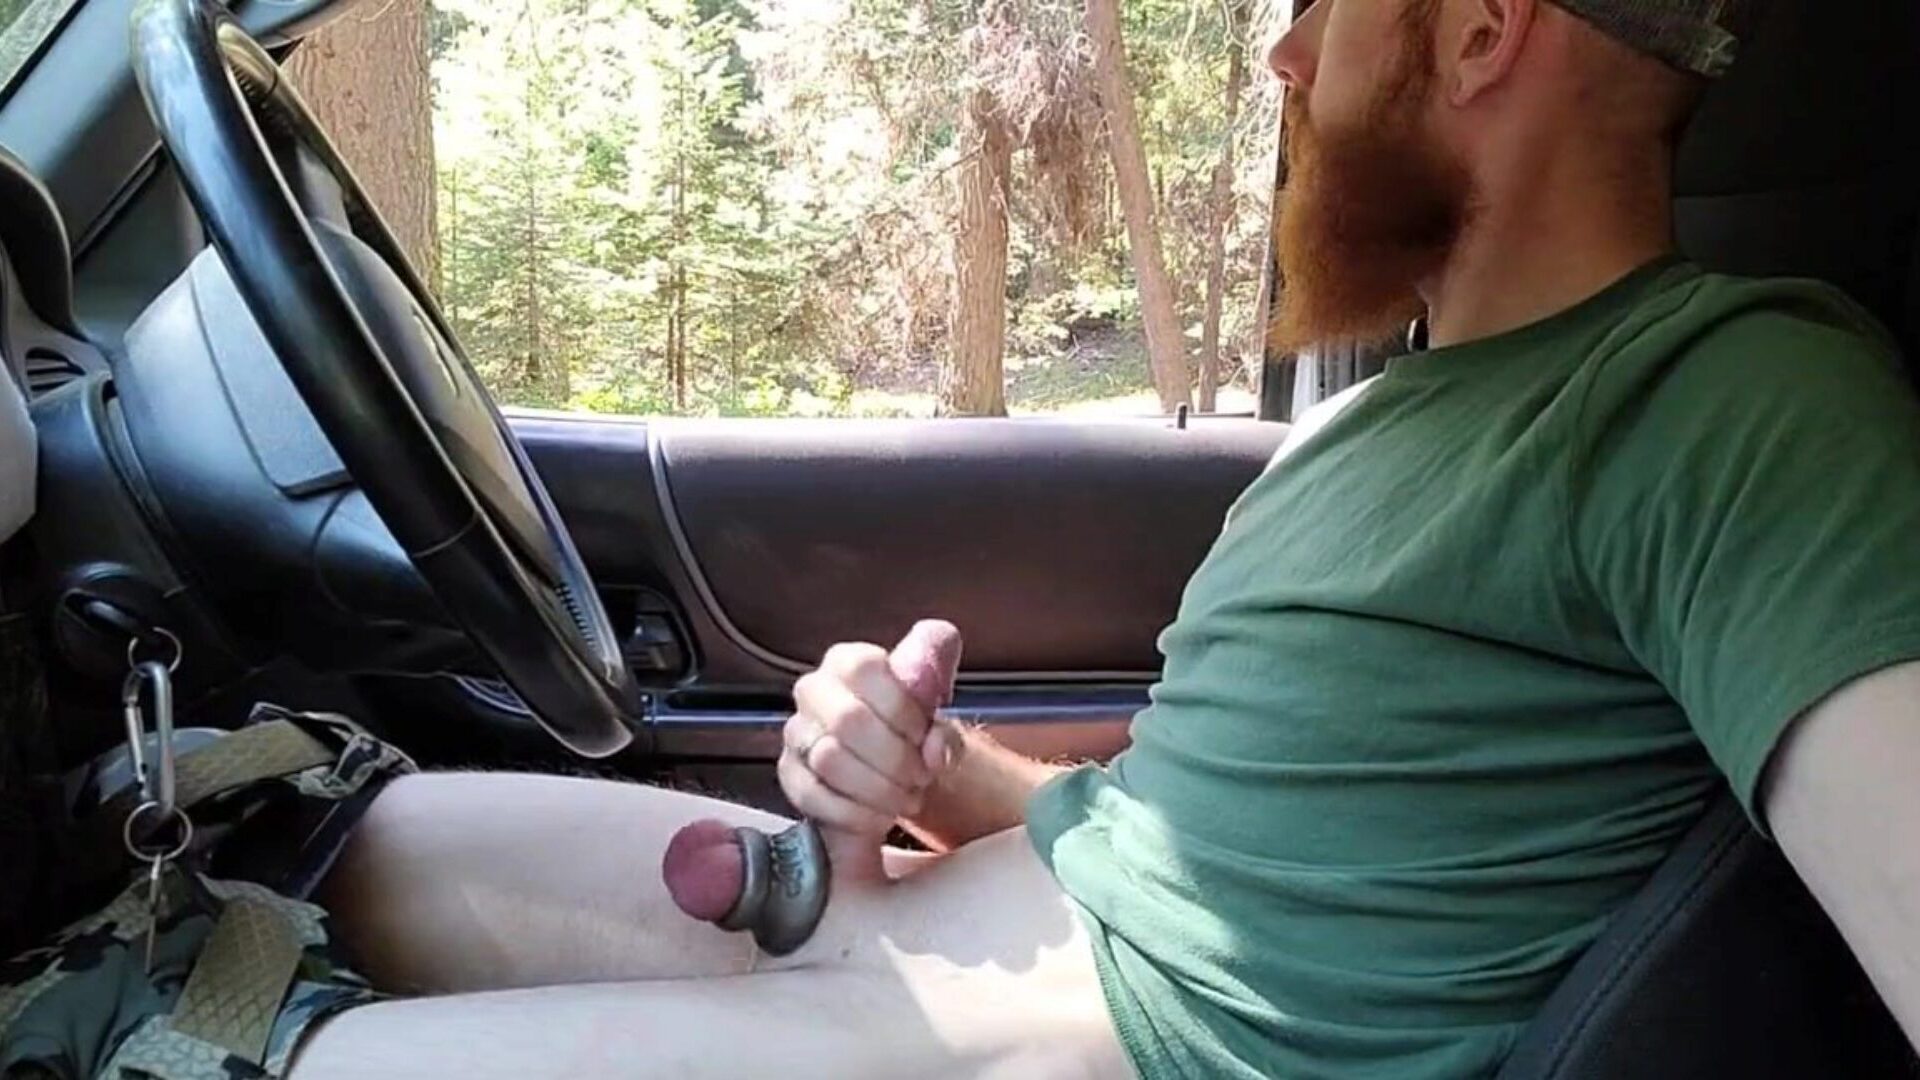 Almost caught jizzing into a fucktoy whilst parked in the woods